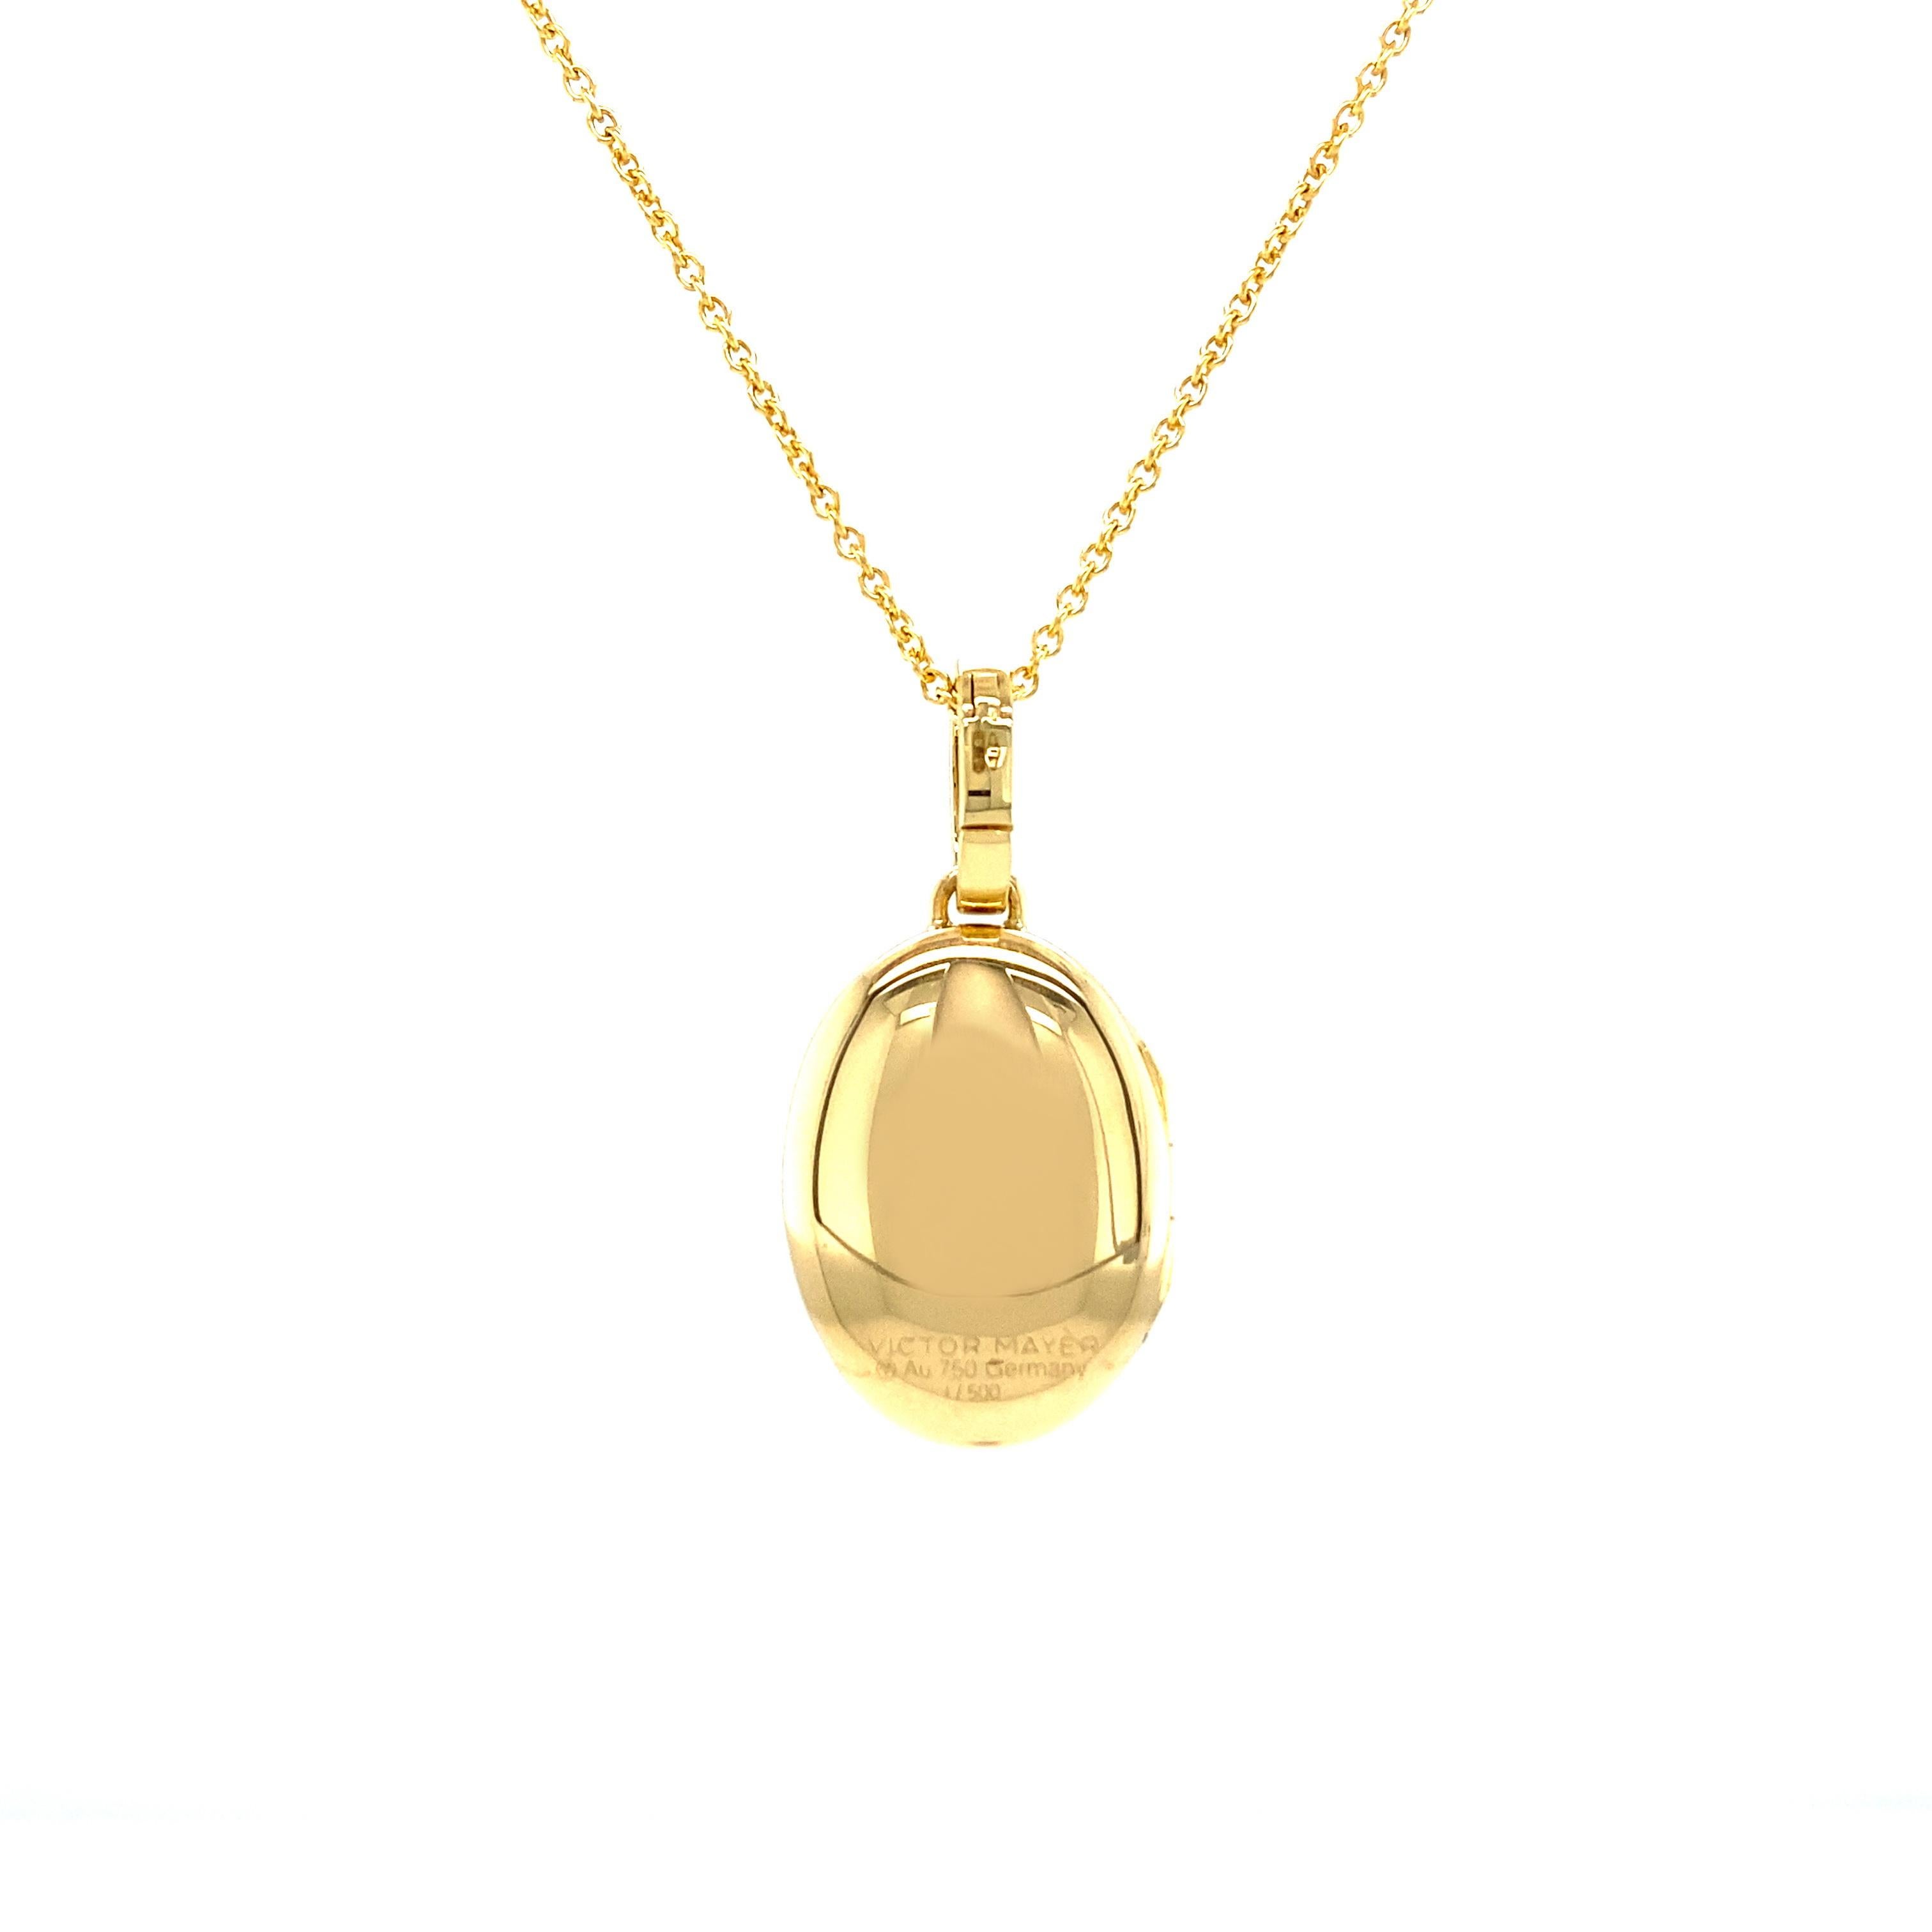  Oval Locket Pendant - 18k Yellow Gold - Blue Enamel with Paillons - 1 Sapphire For Sale 2